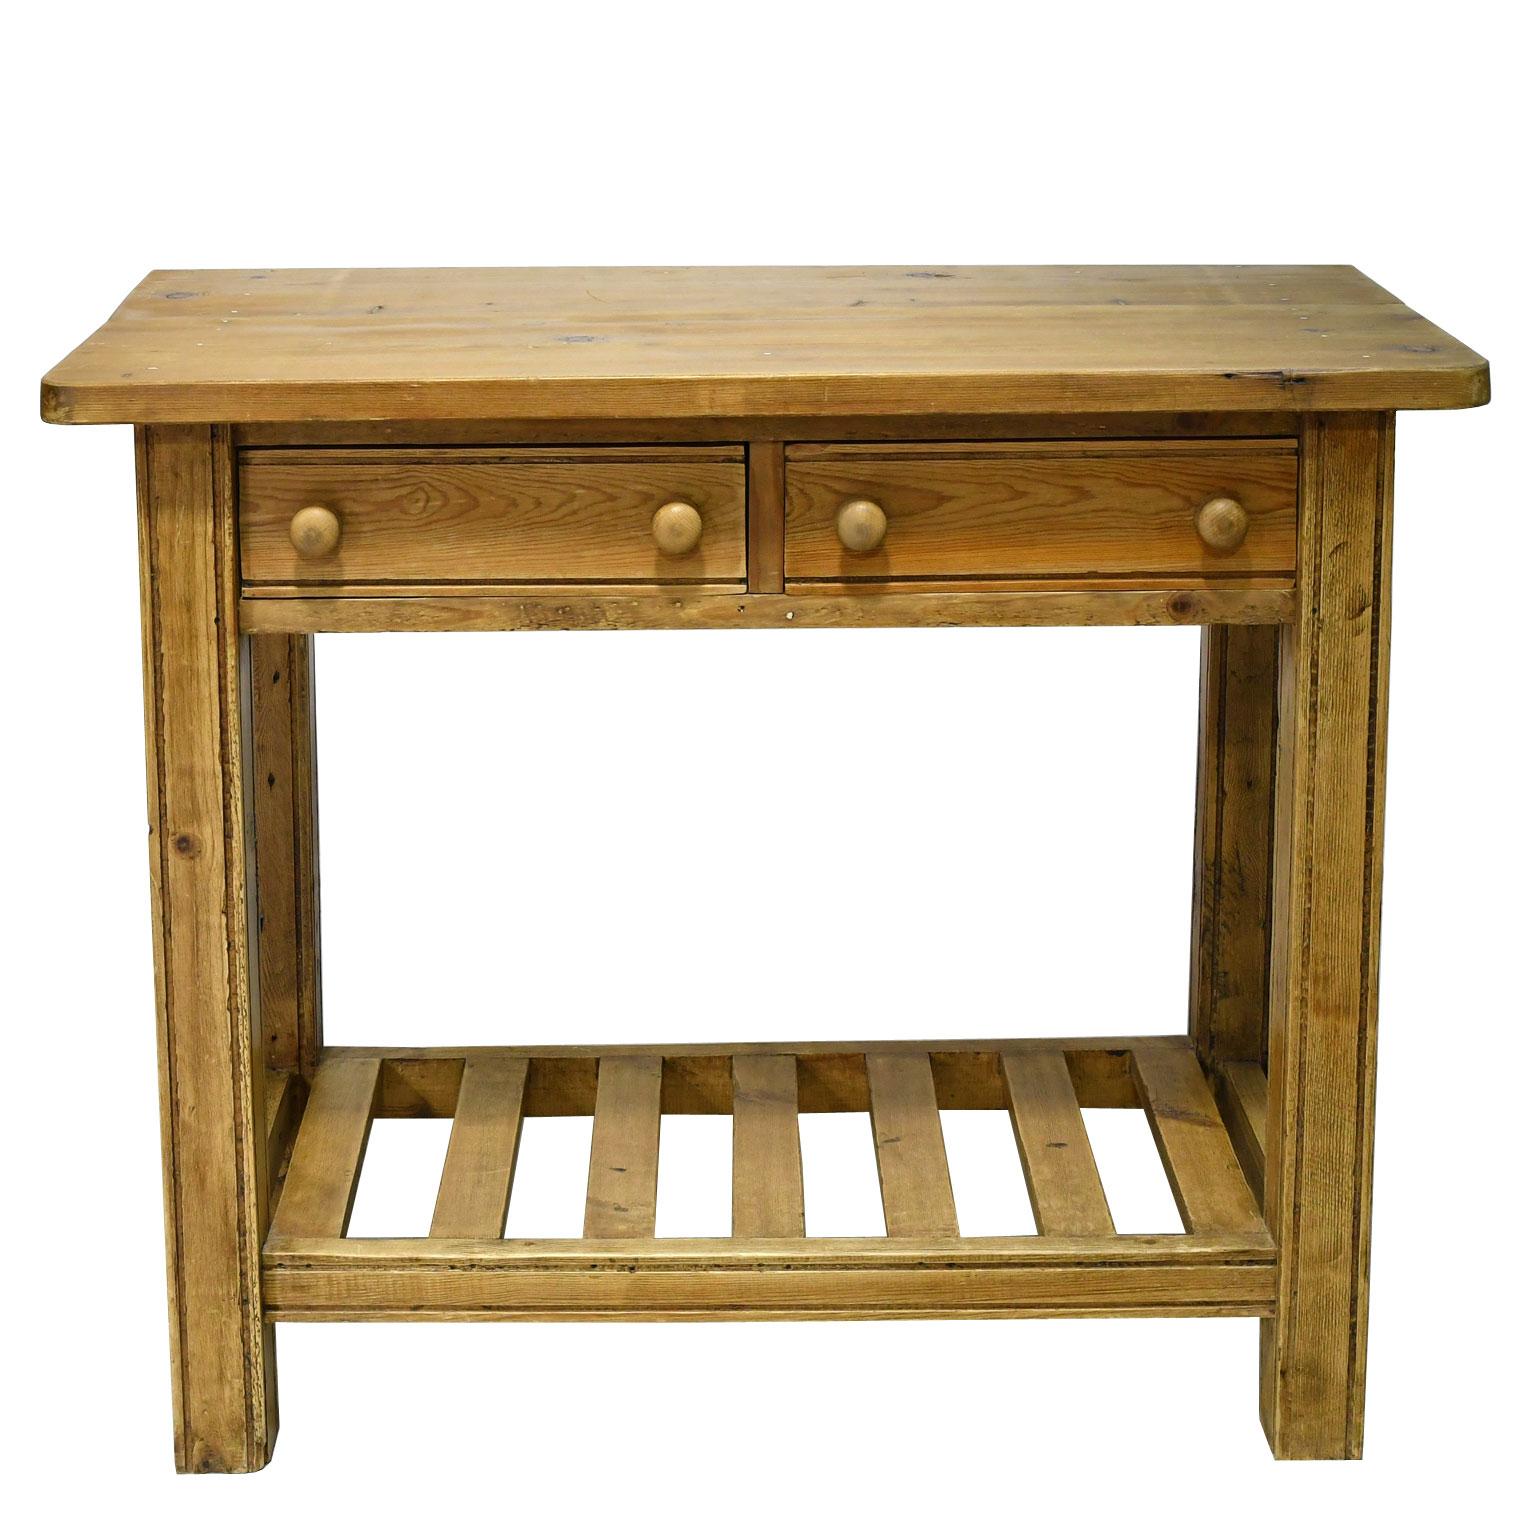 Vintage Rustic English Country-Style Table in Antique Pine For Sale